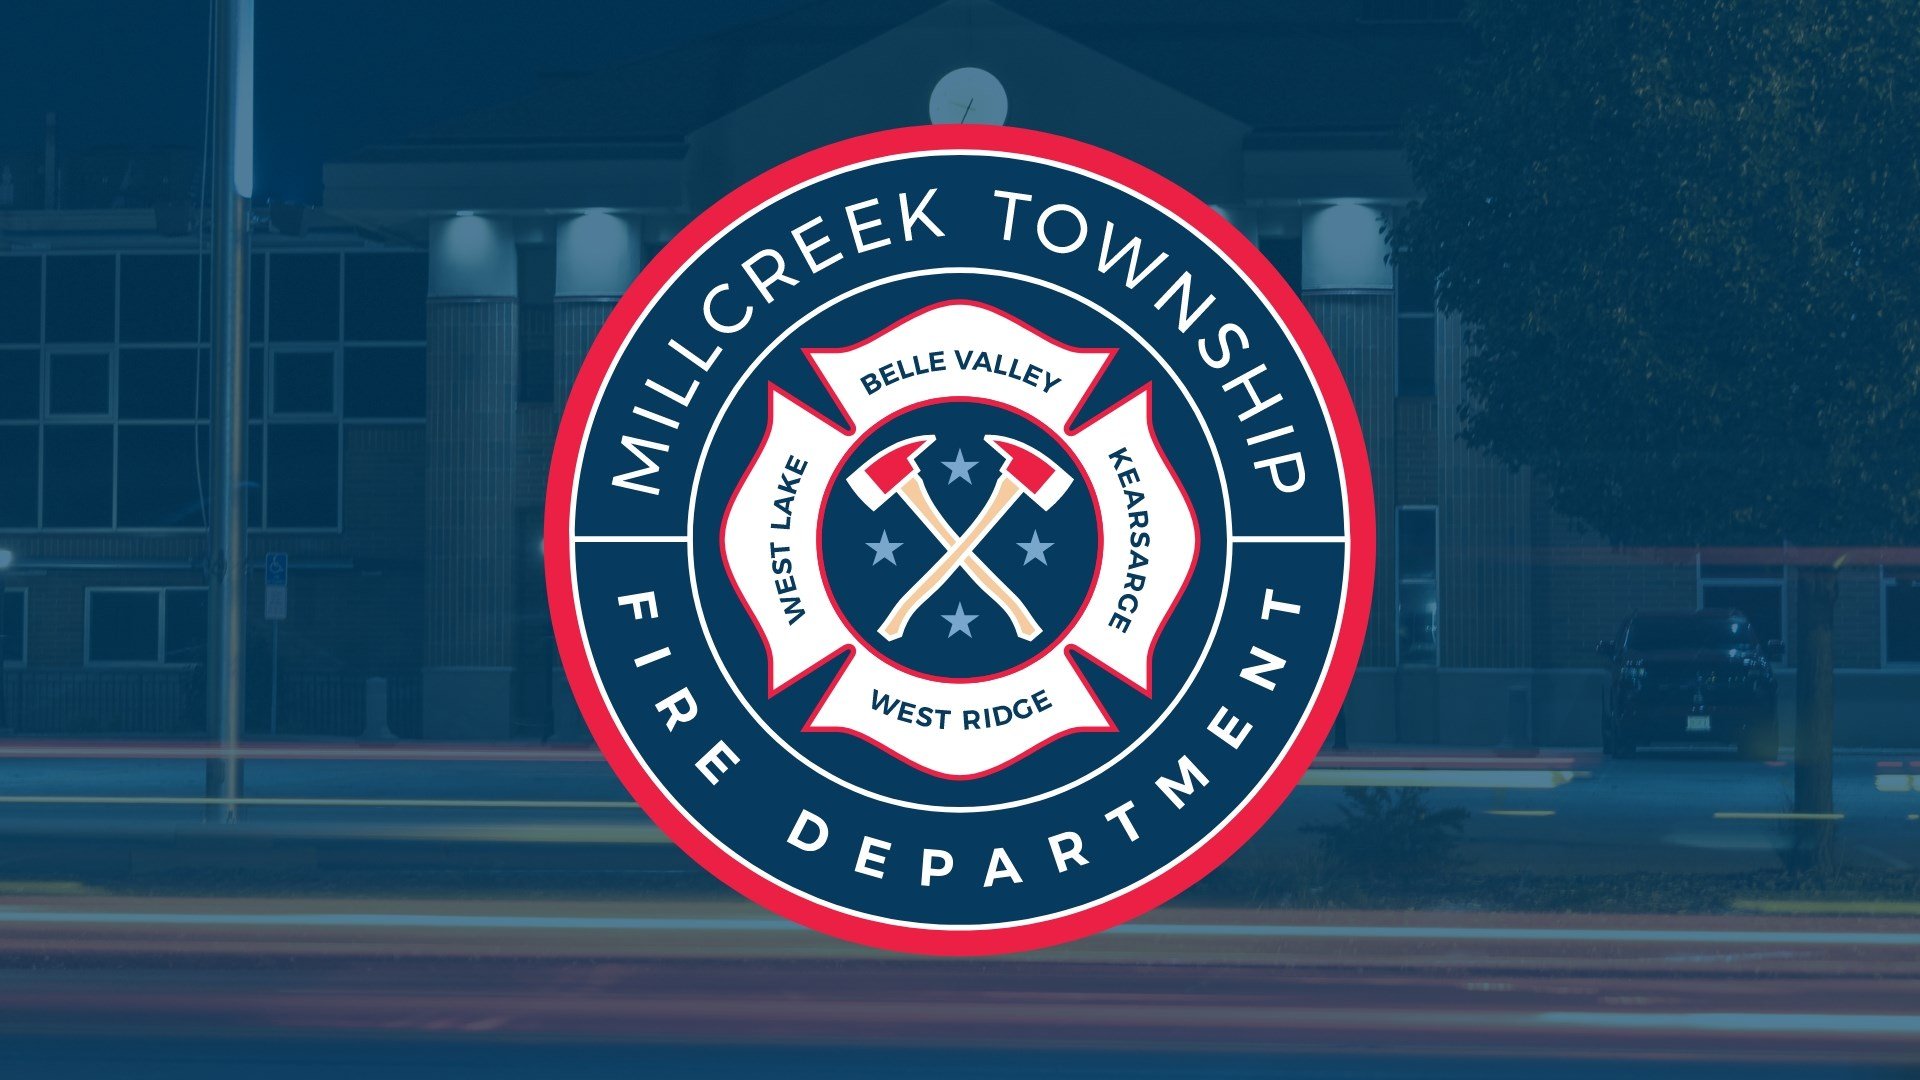 Kearsarge Fire Departments Enters Partnership Agreement with Millcreek Township Fire Department